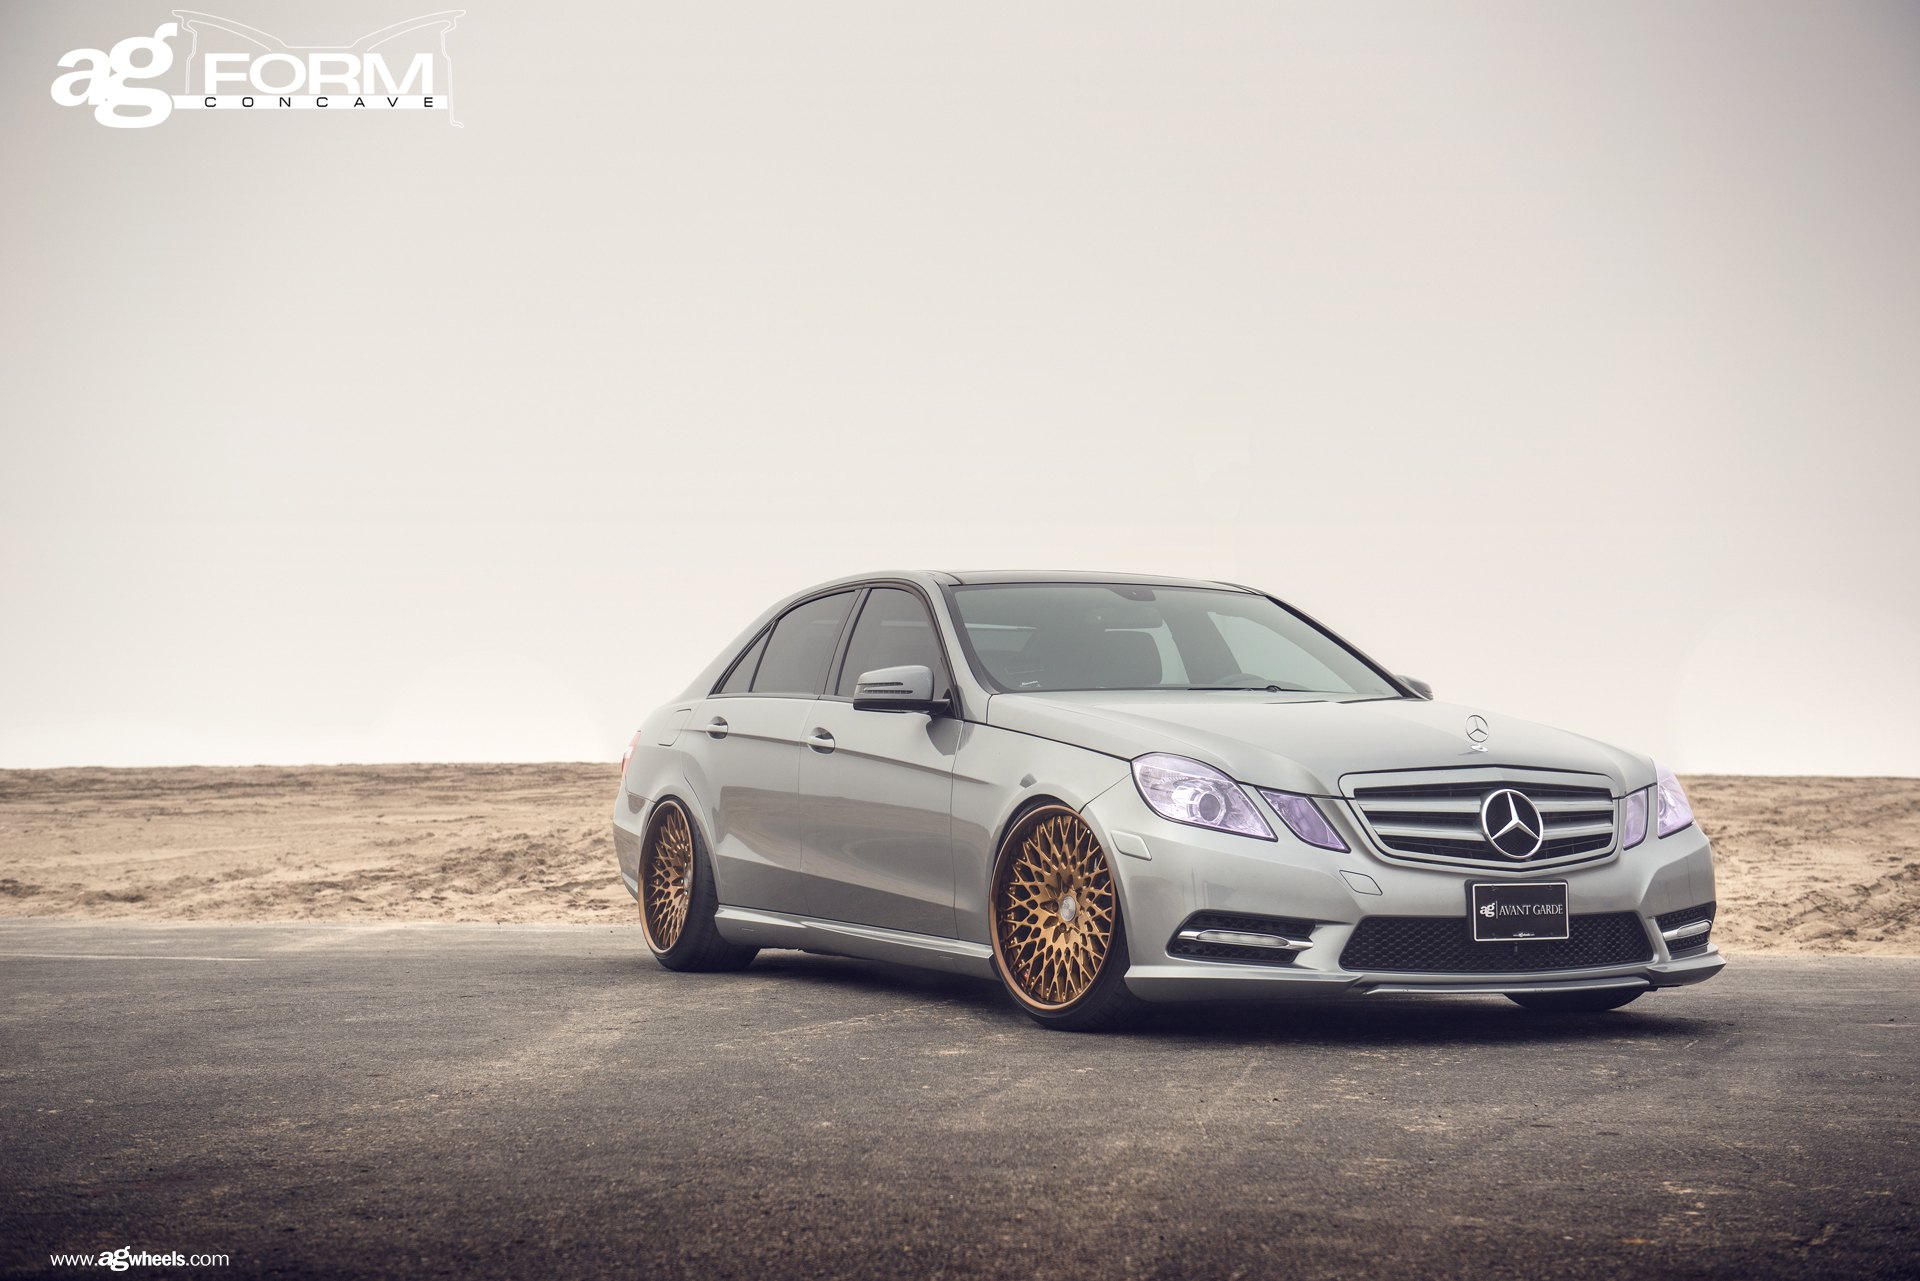 Gray Mercedes E-Class with Chrome Grille - Photo by Avant Garde Wheels